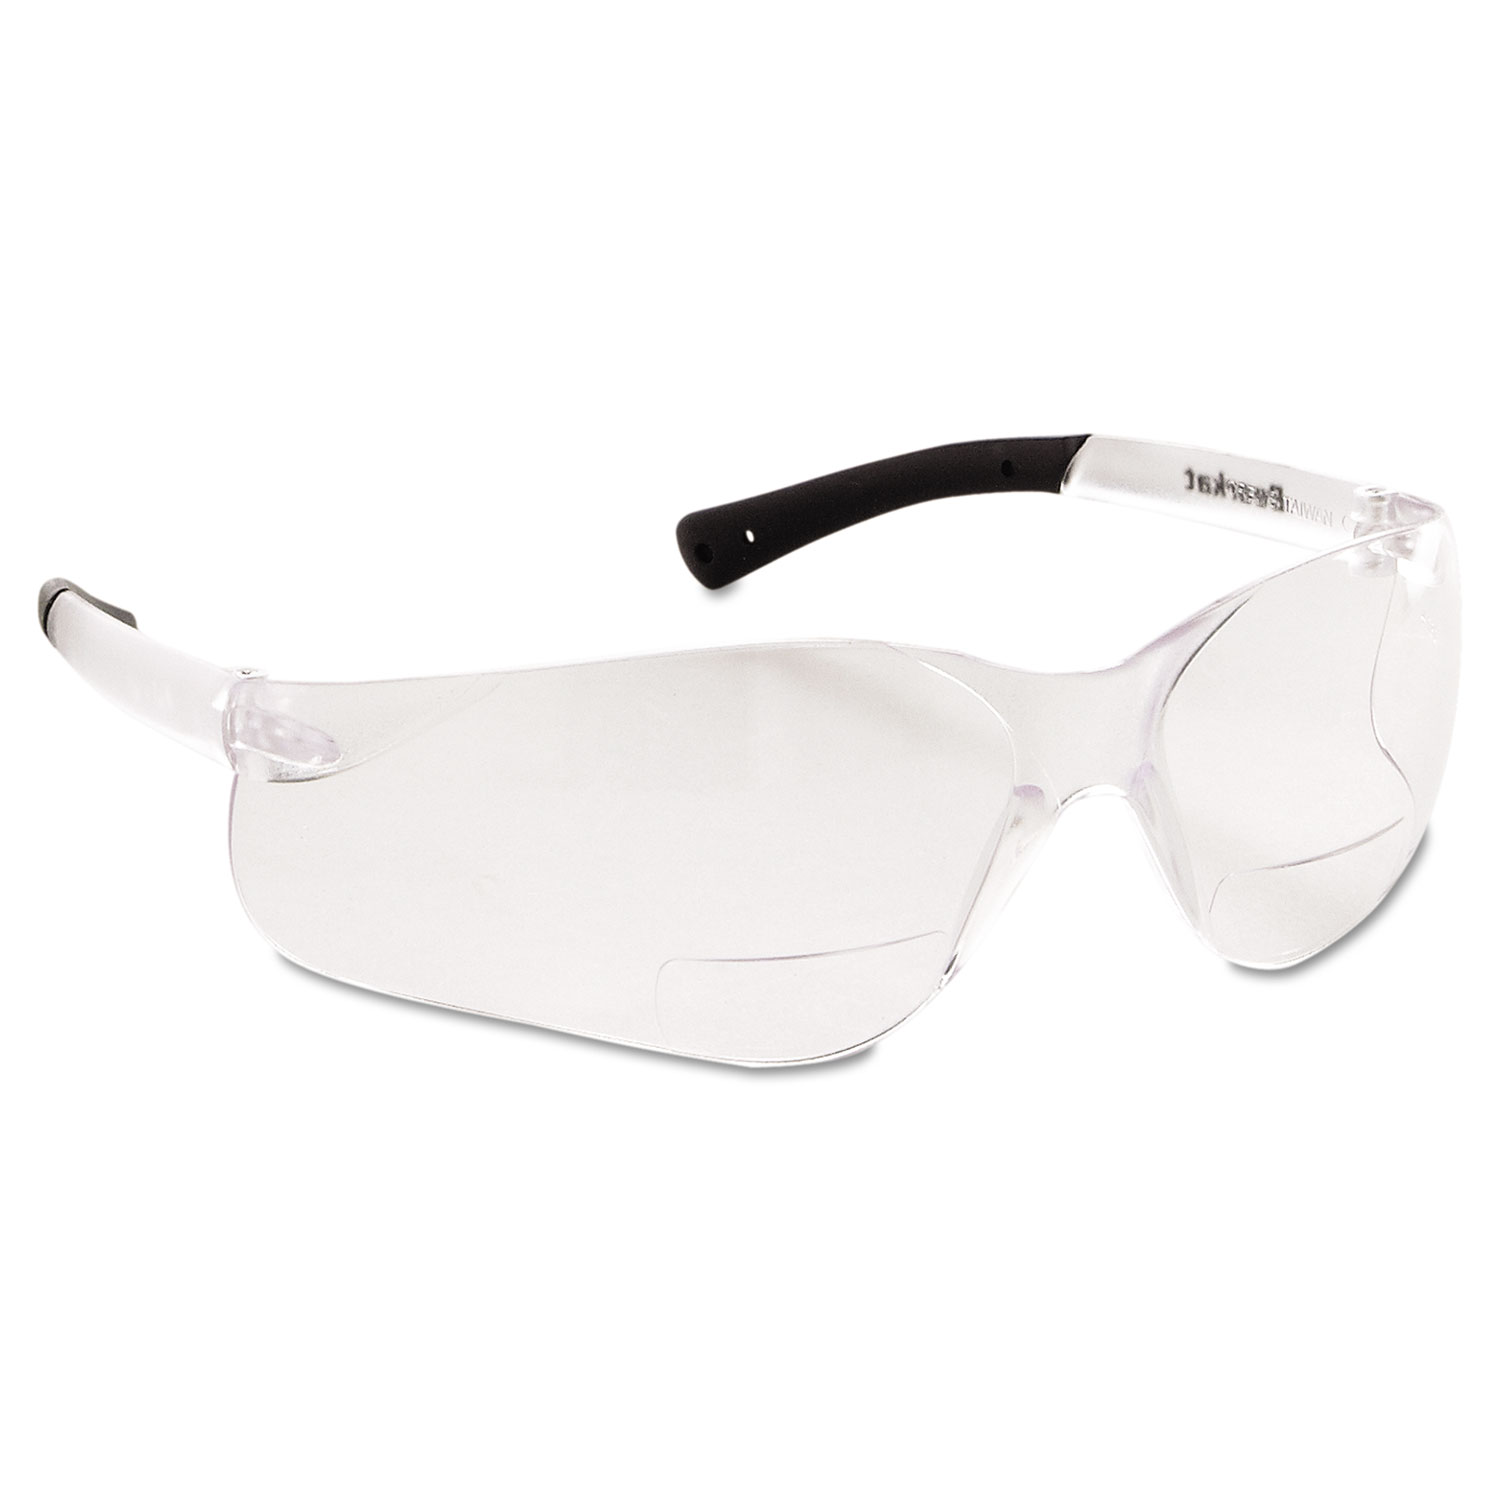  MCR Safety BKH25 Bearkat Magnifier Protective Eyewear, Clear, 2.5 Diopter (CRWBKH25) 